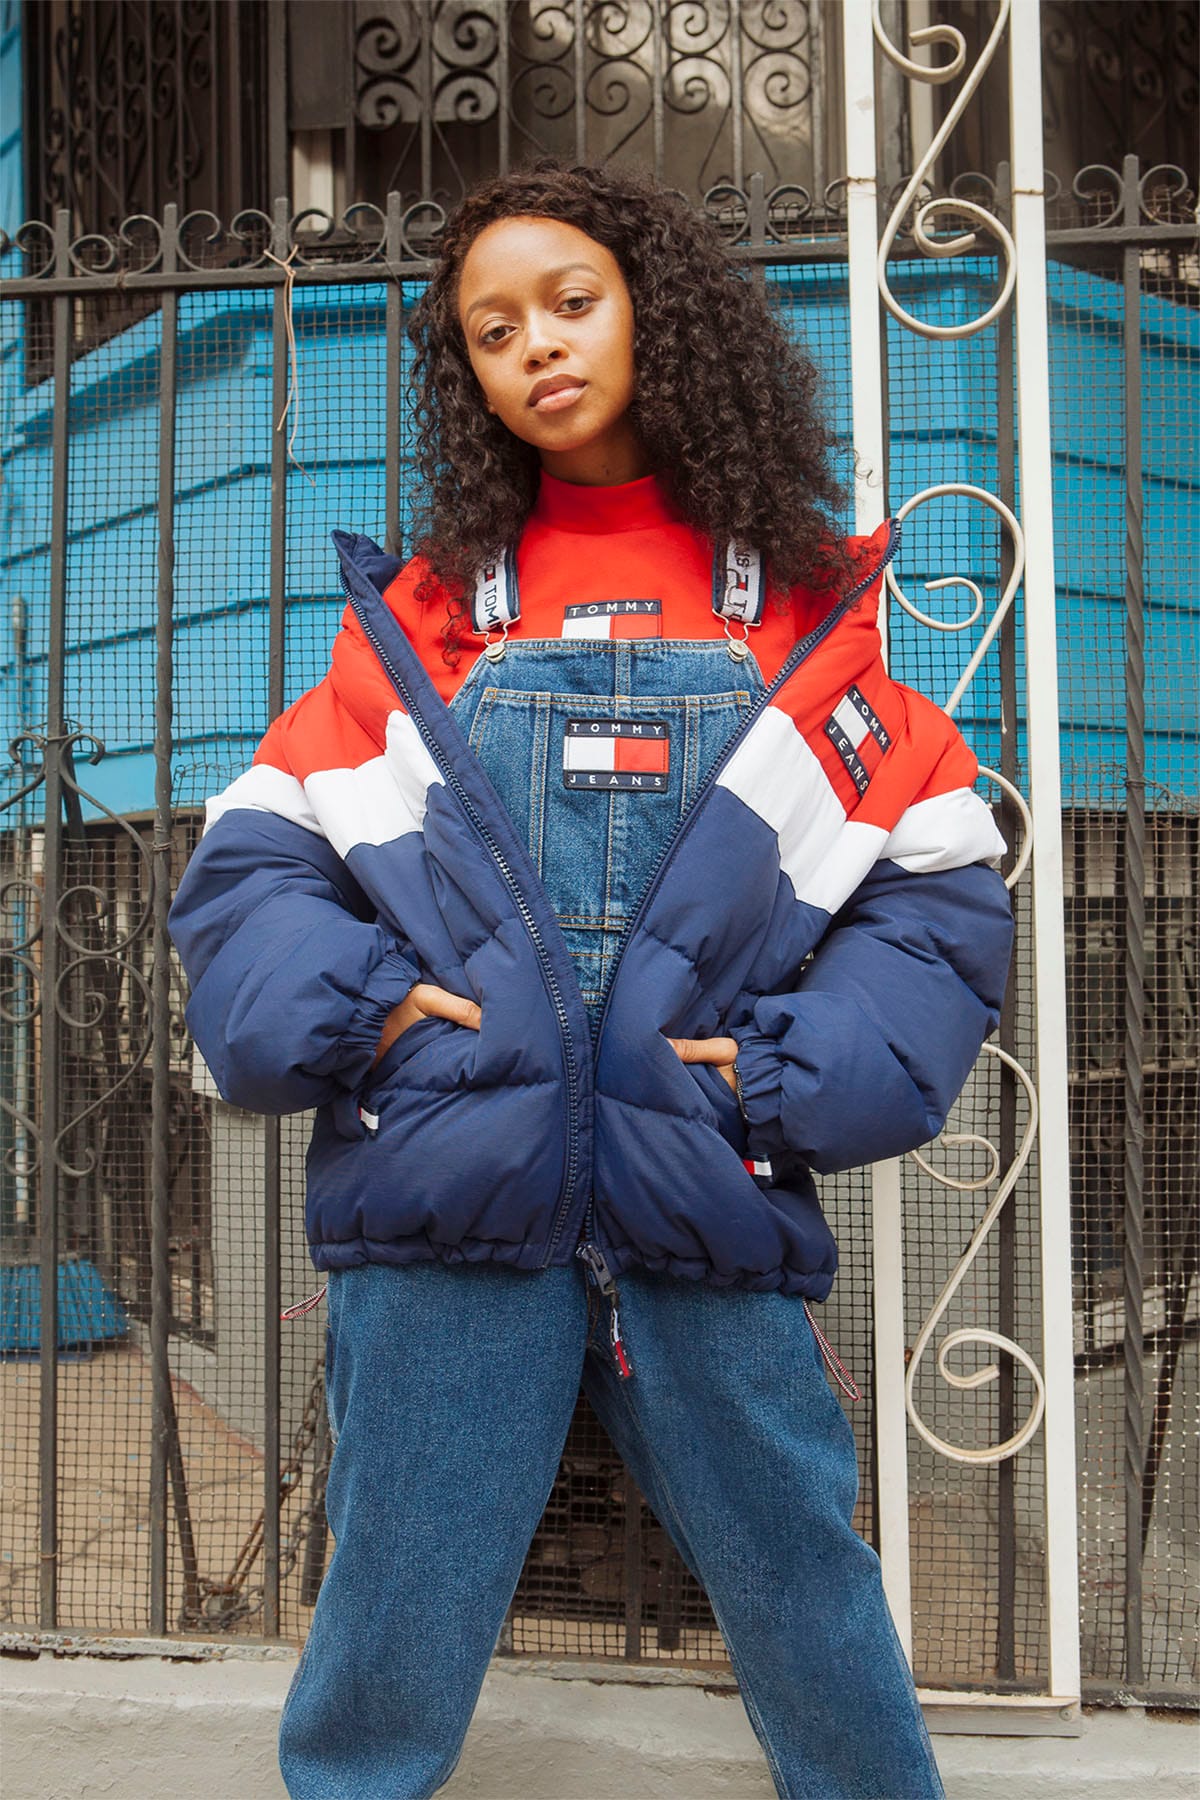 90s tommy hilfiger outfits